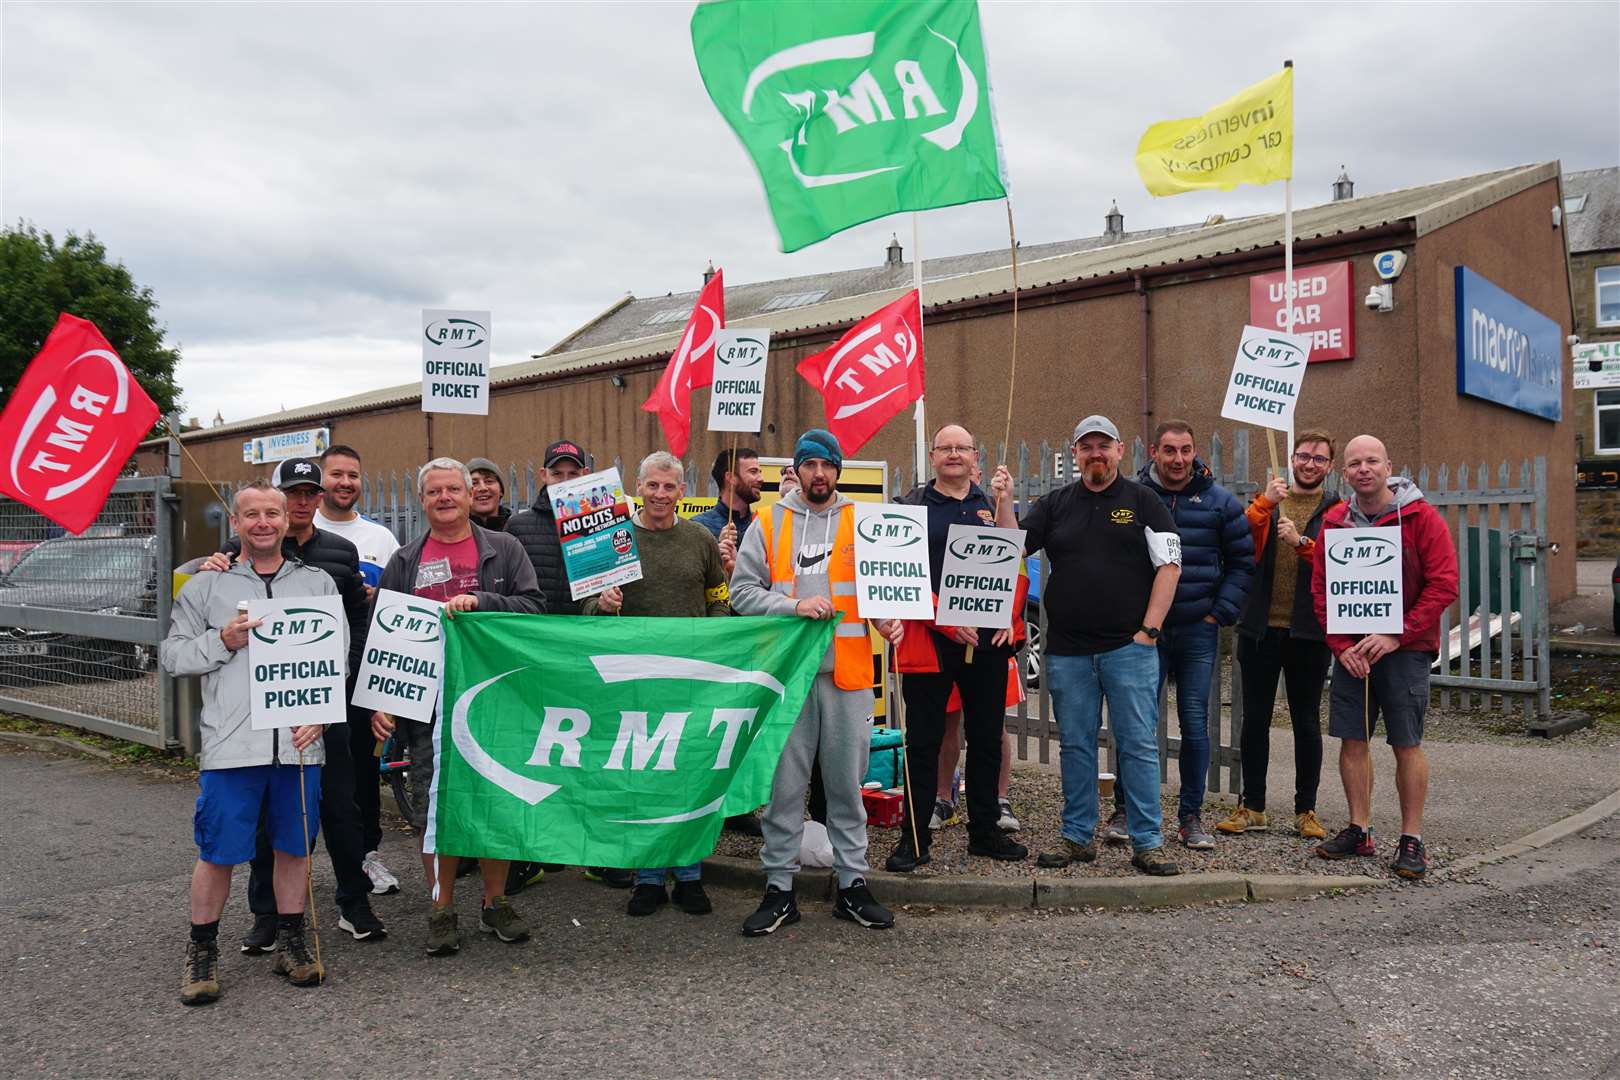 RMT Members picketing near the train Depot on the Longman road in Inverness. Pictures: Federica Stefani